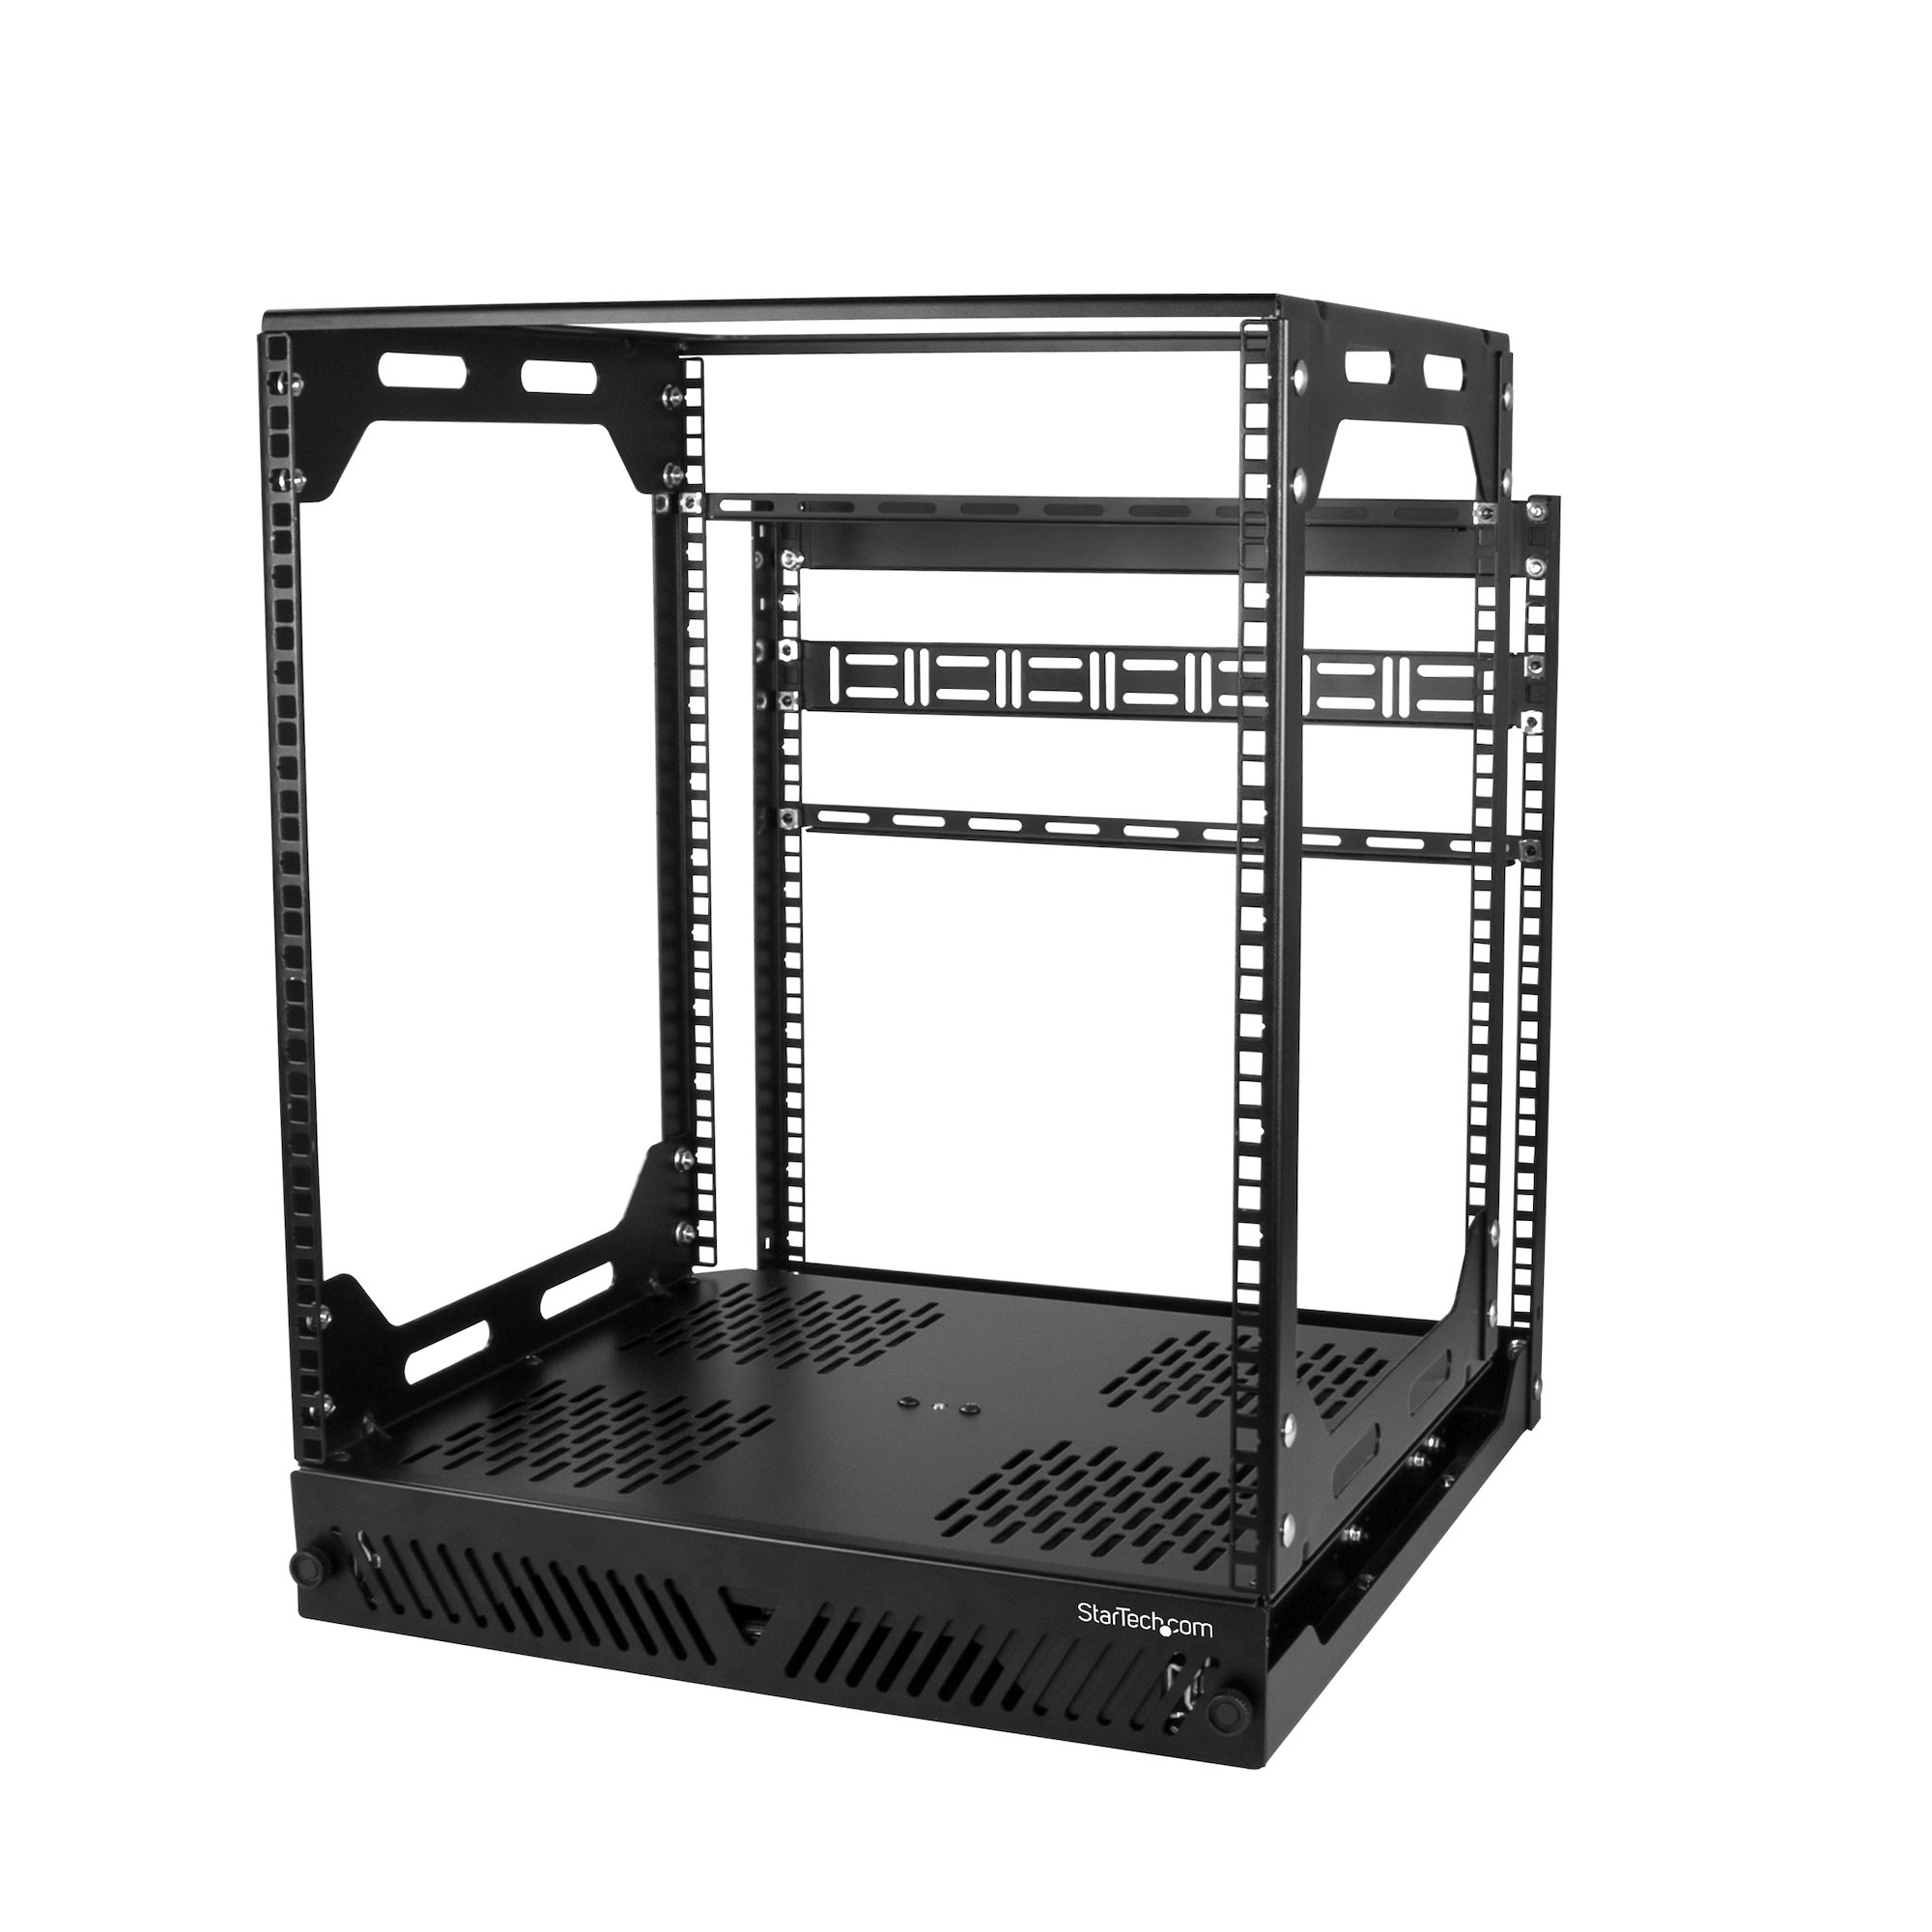 Server Rack Retaining Post for Cable Runway